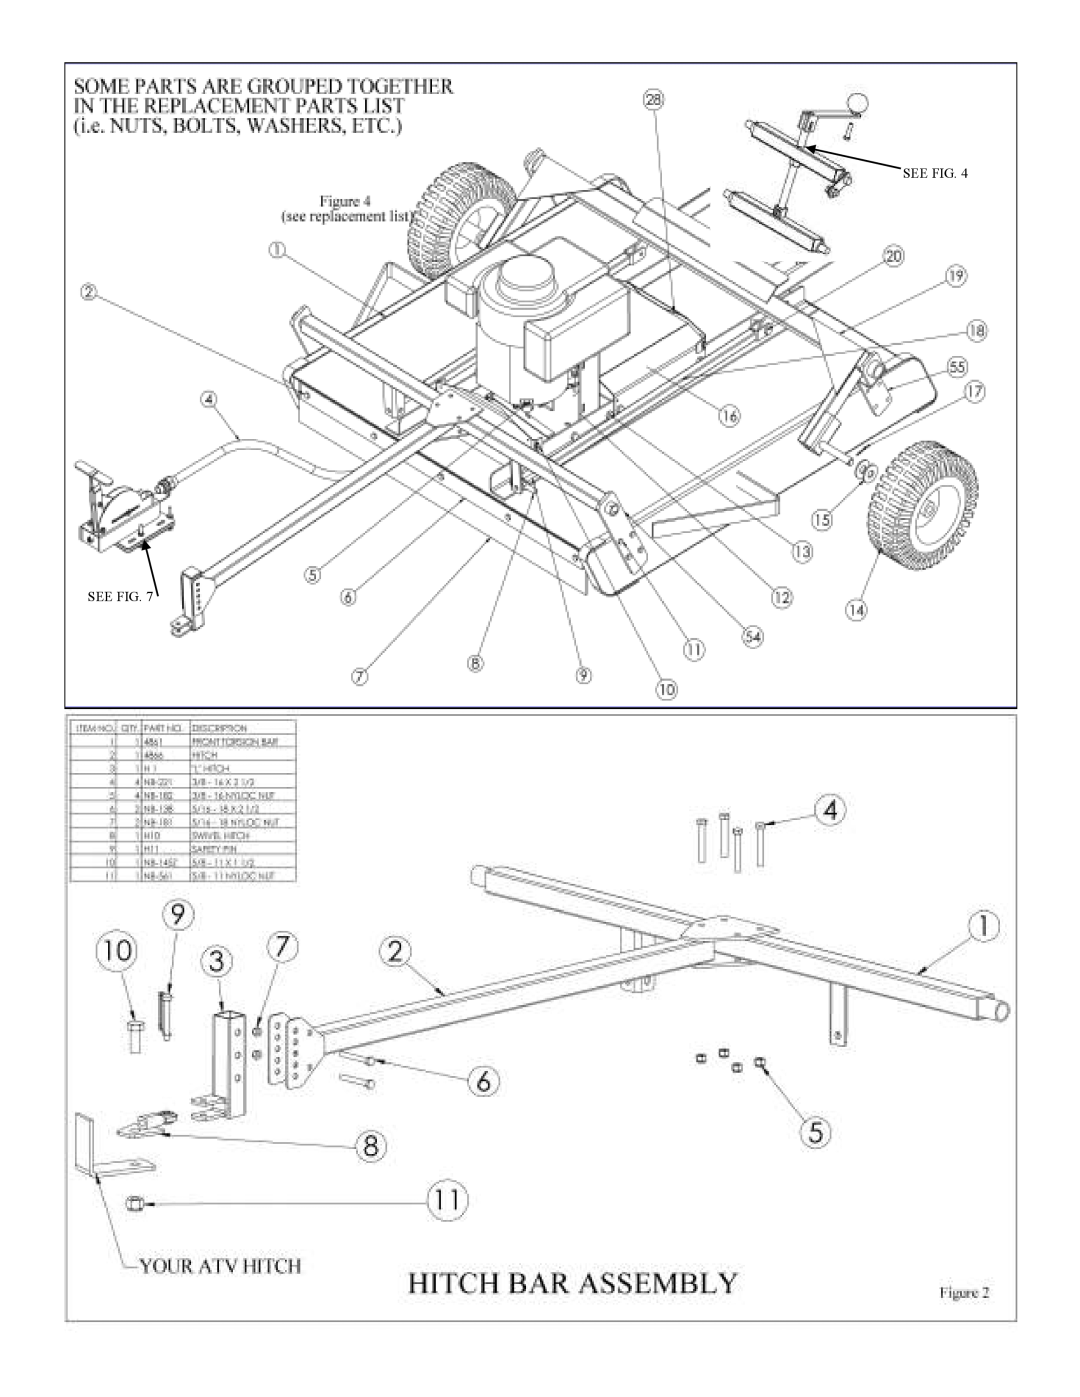 Swisher RTB105441, RT800441, RT105441, POL10544HD owner manual See Fig See Fig 